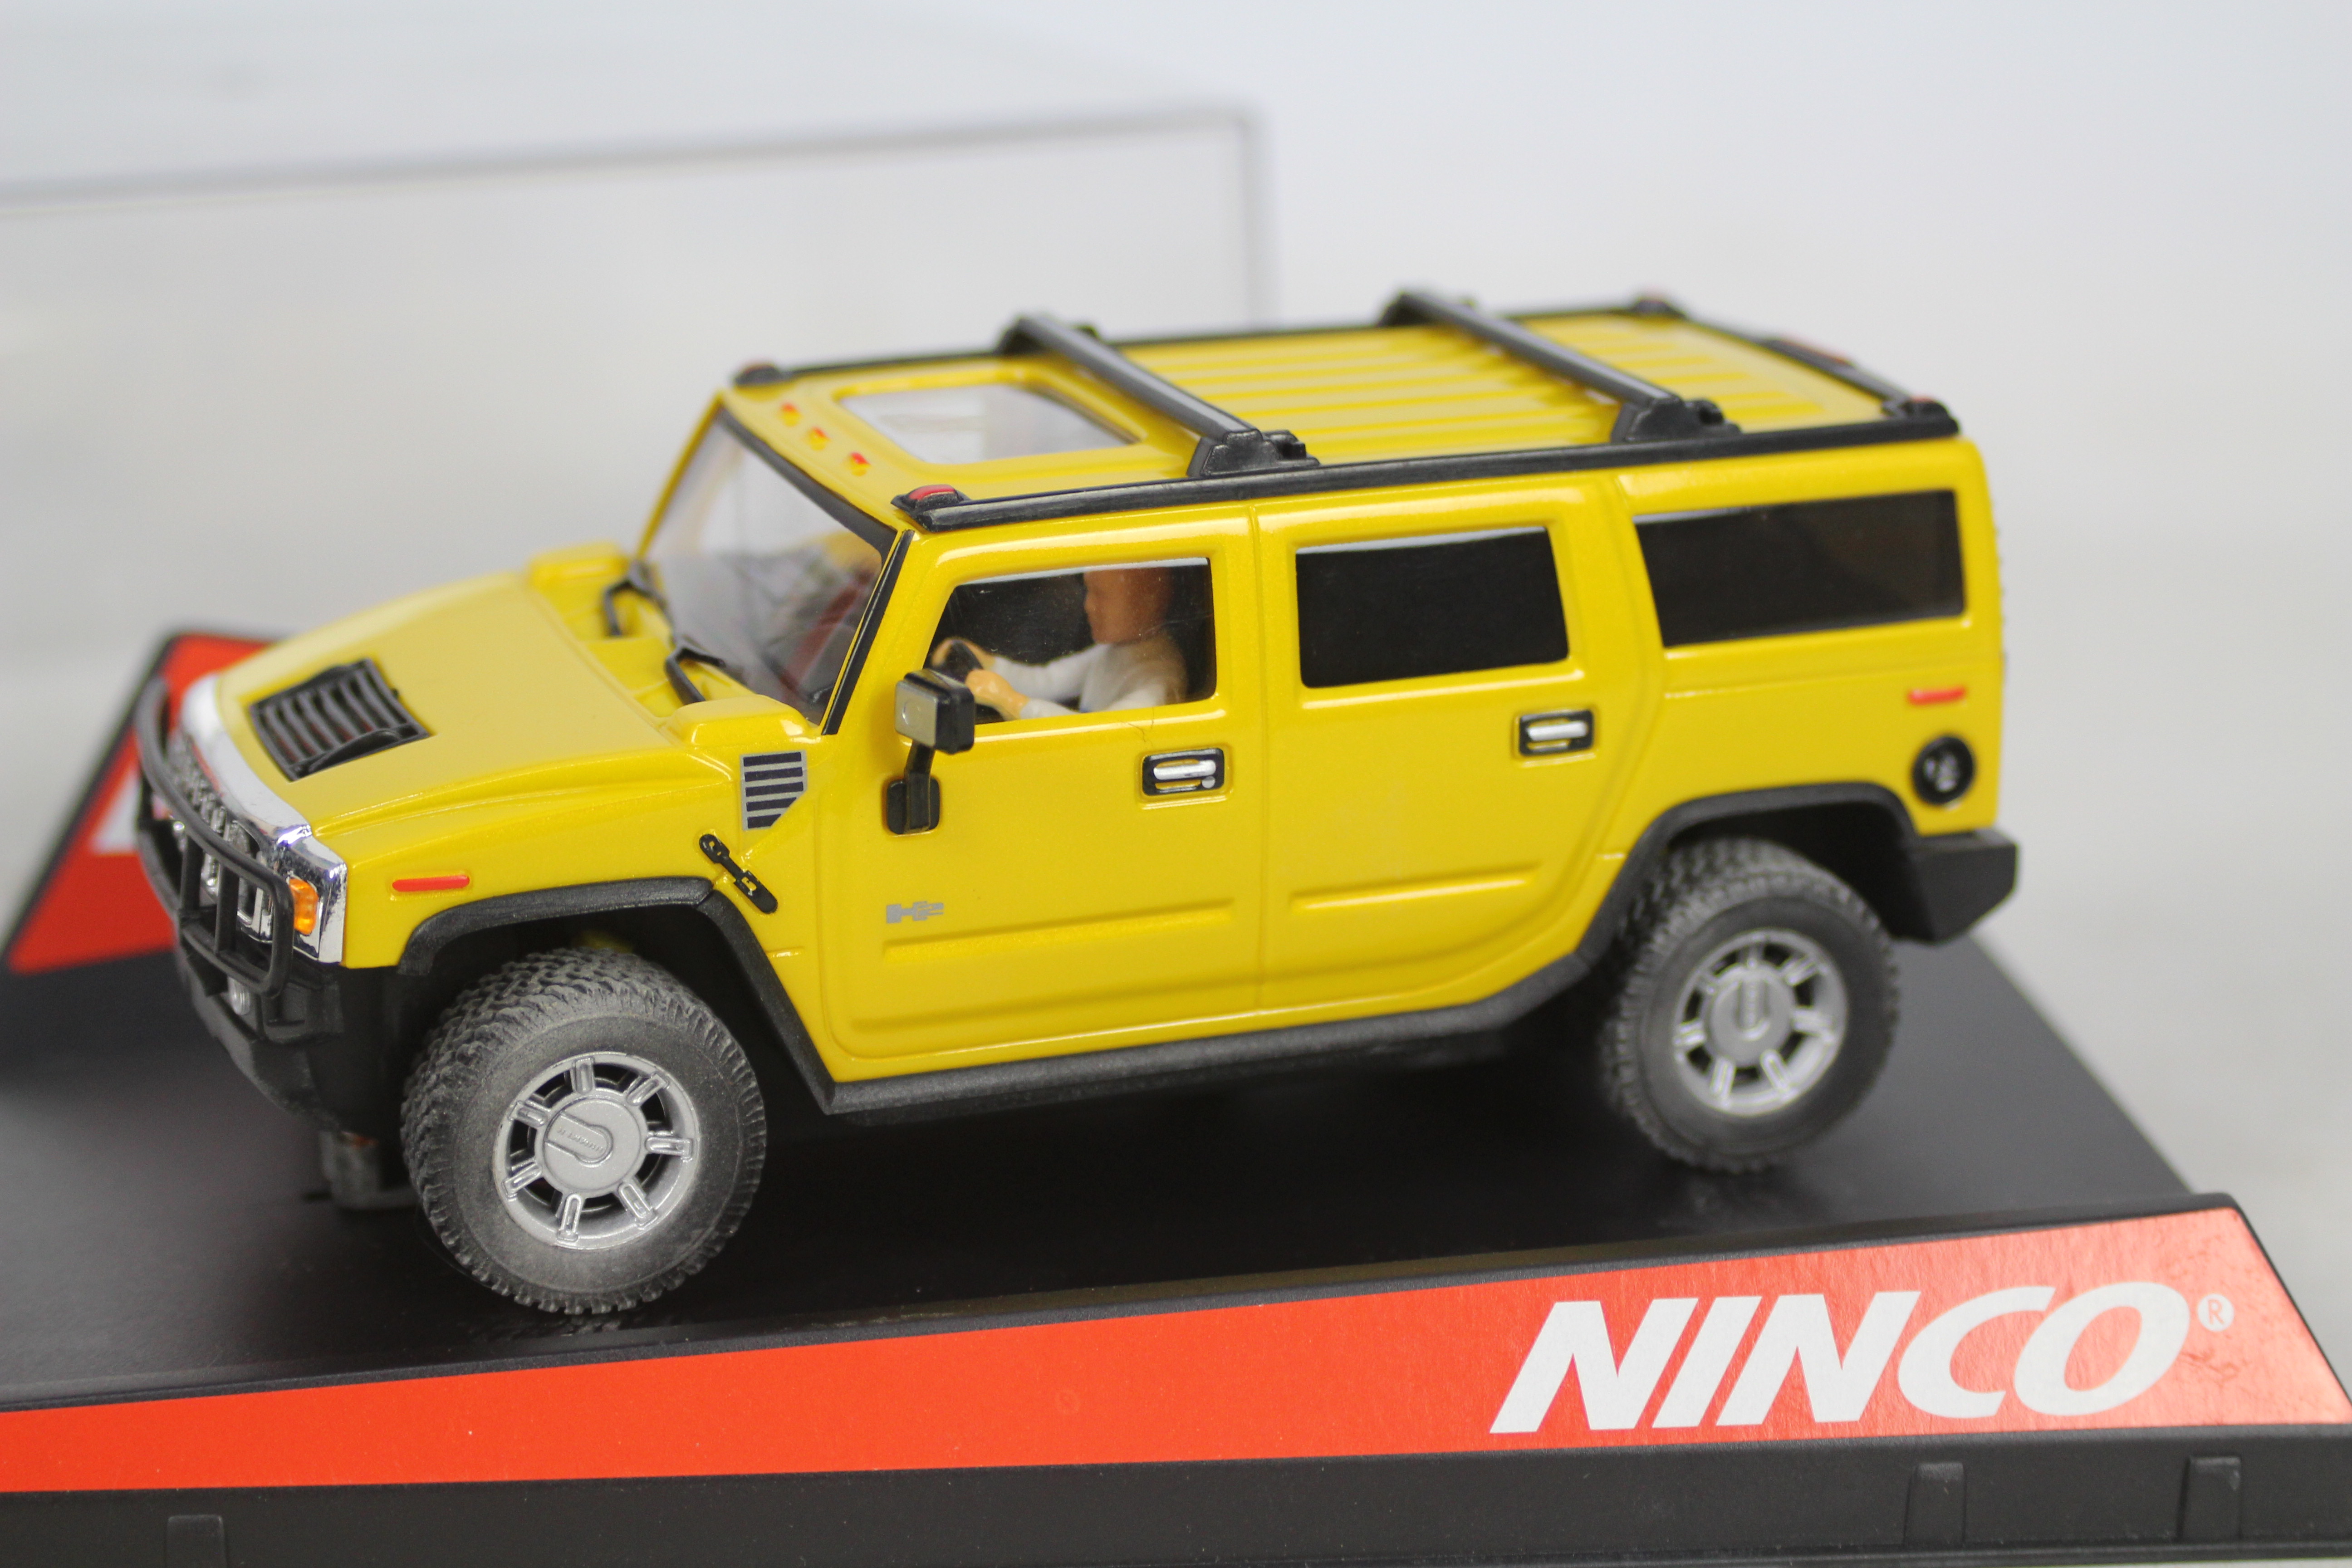 Ninco - A boxed 1:32 scale die-cast hummer vehicle - Lot includes a #50457 Hummer H2 in a yellow - Image 3 of 4